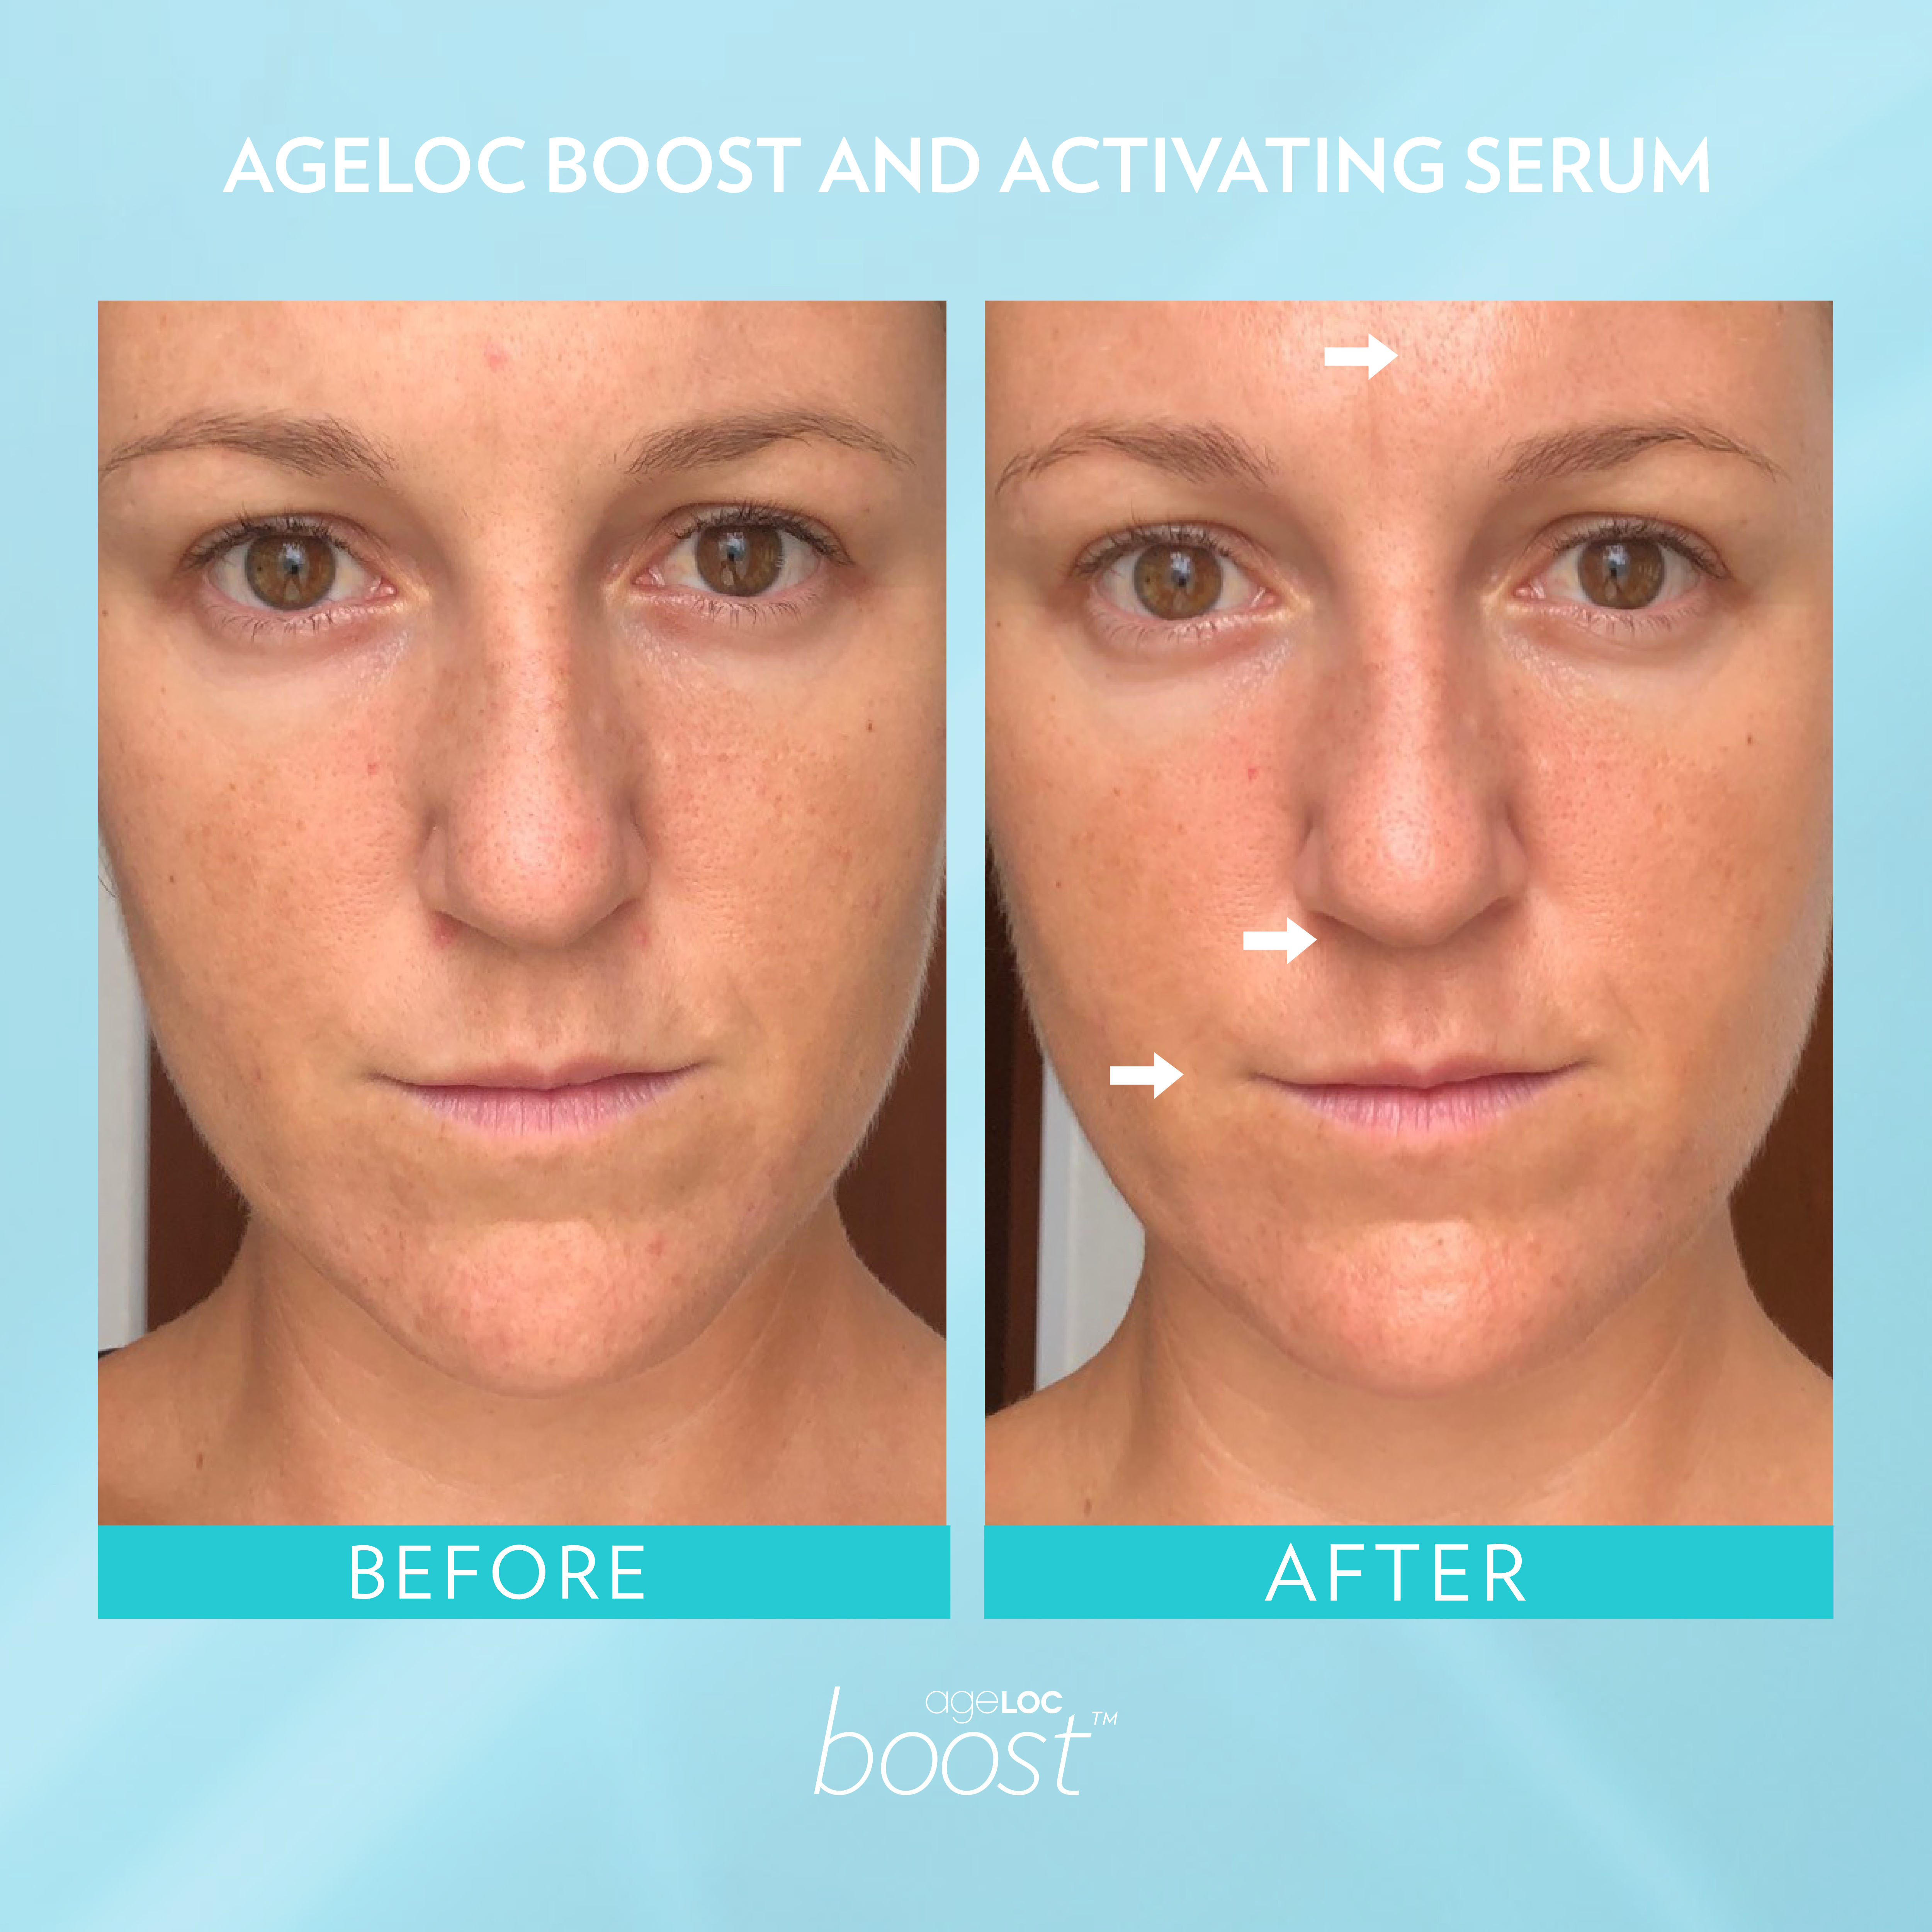 Nu Skin Ageloc Boost reviews before and after results - nubeautyonline